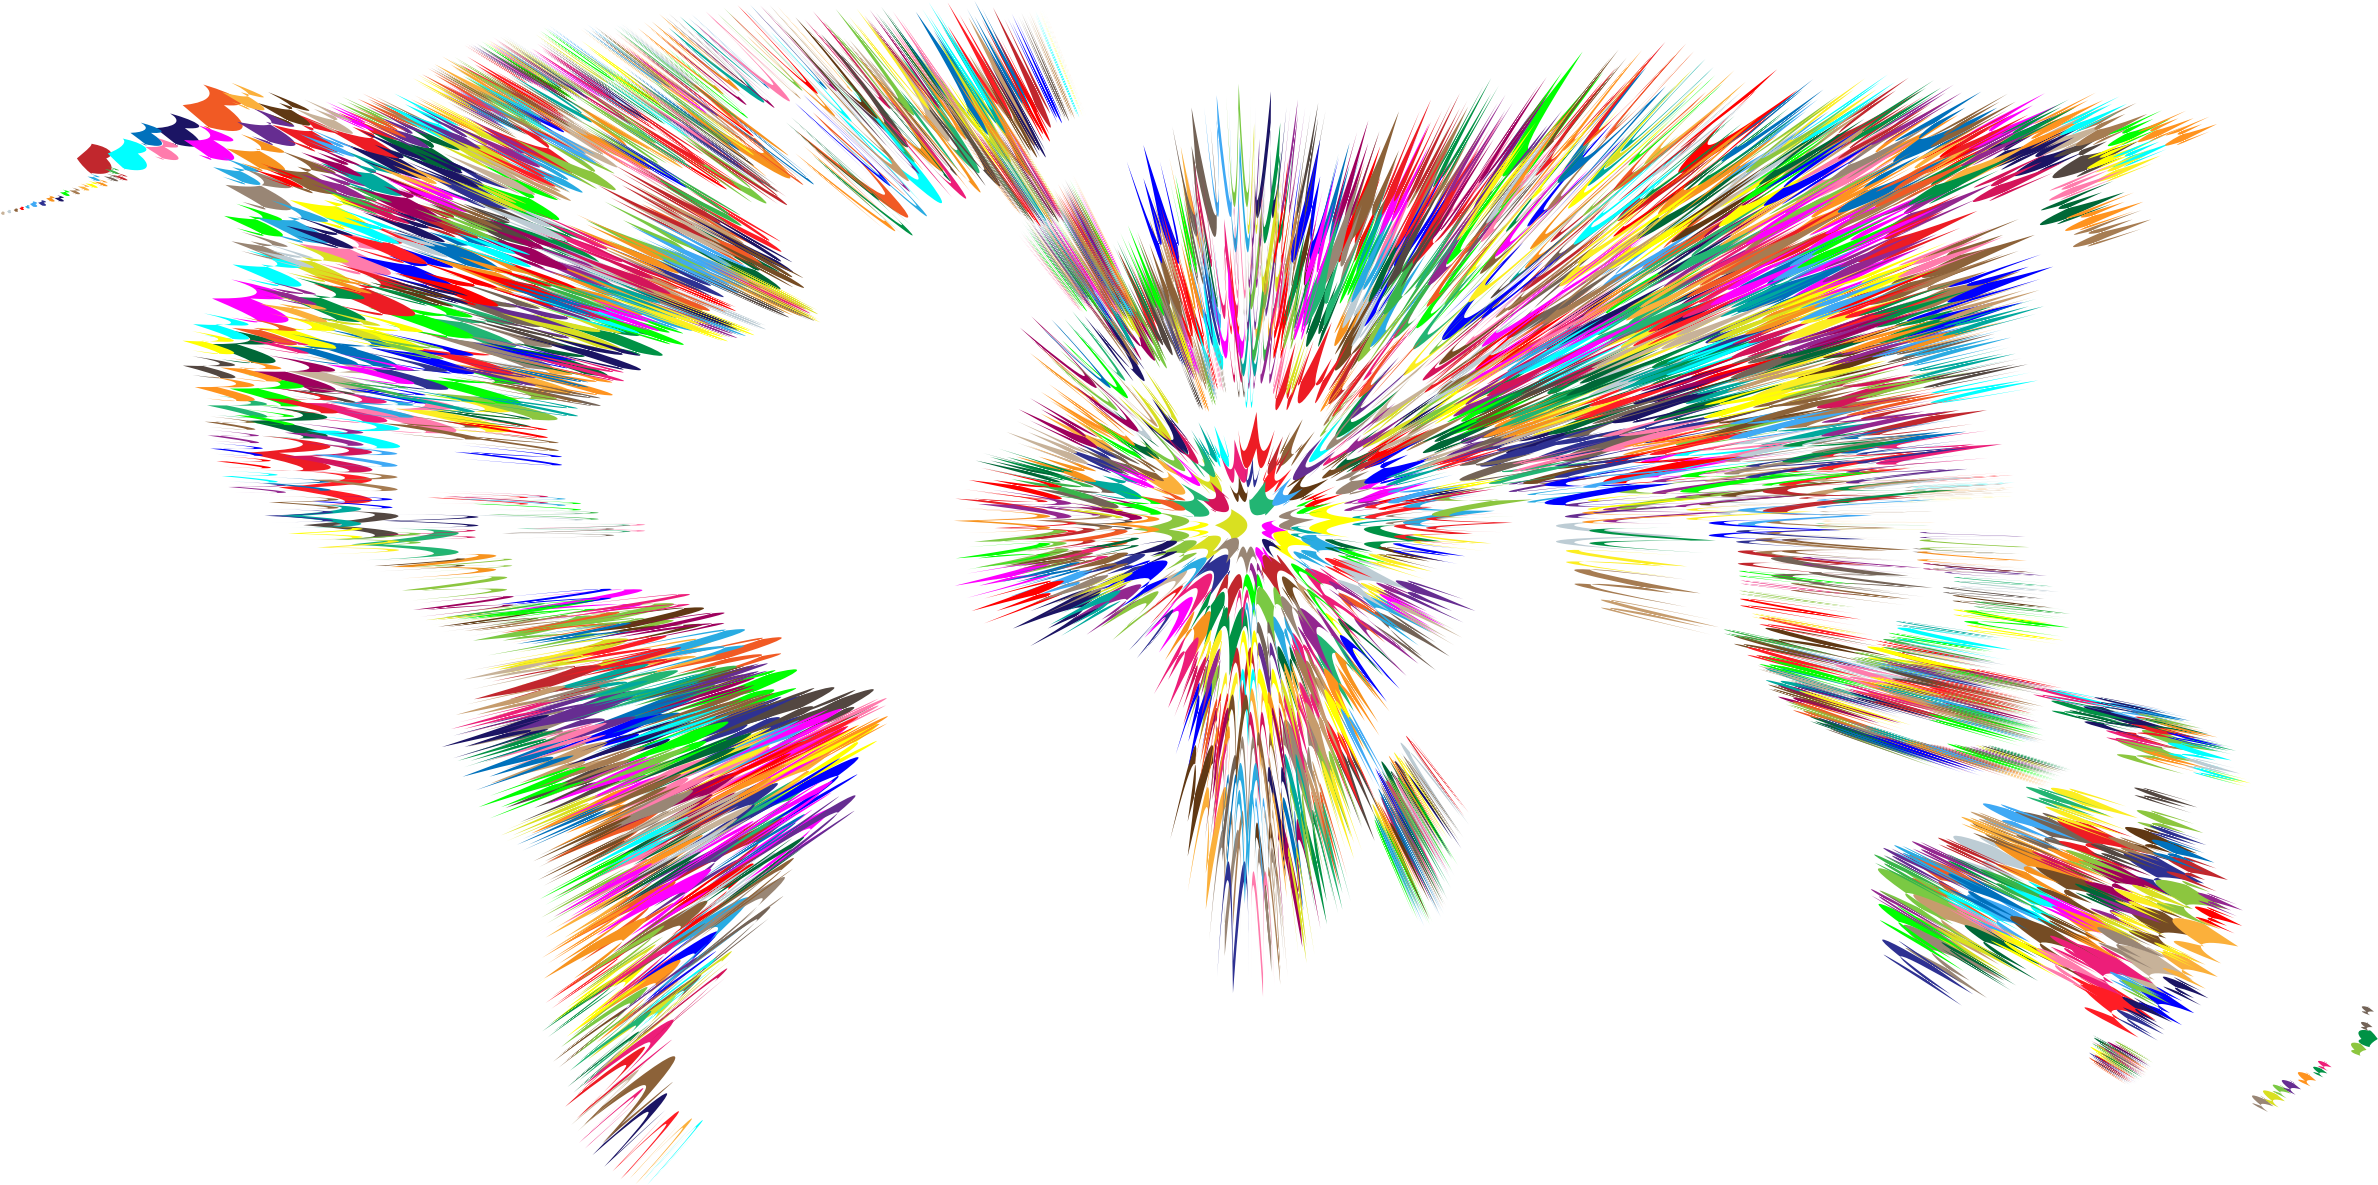 Abstract World Map Image Free HQ Image PNG Image